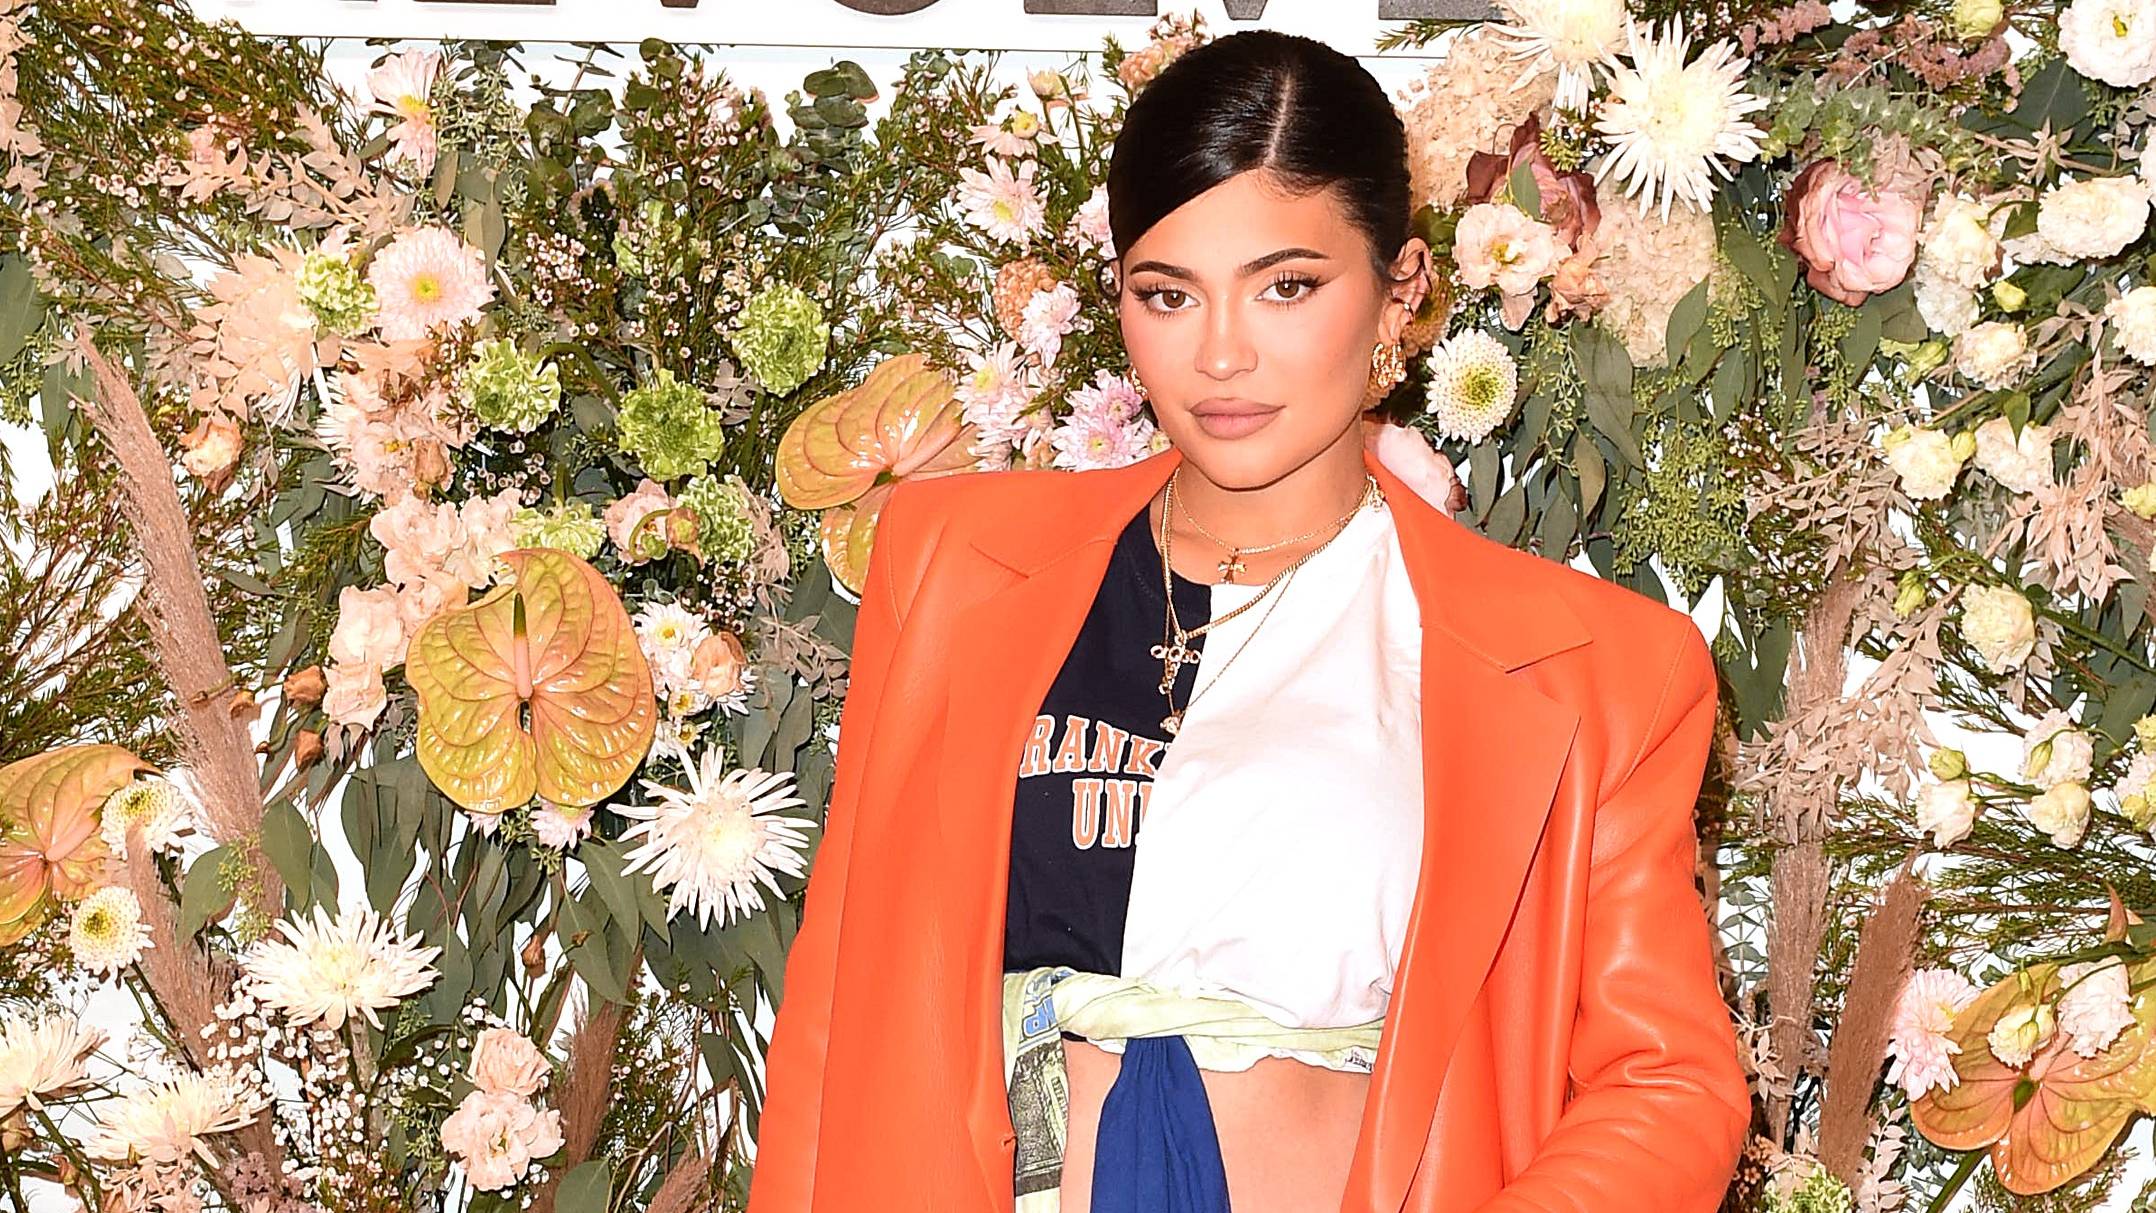 Rich, Rich!: Kylie Jenner Updates Her $1 Million Closet With A New $50K  Birkin Bag And Fabulous Fall Goodies, News